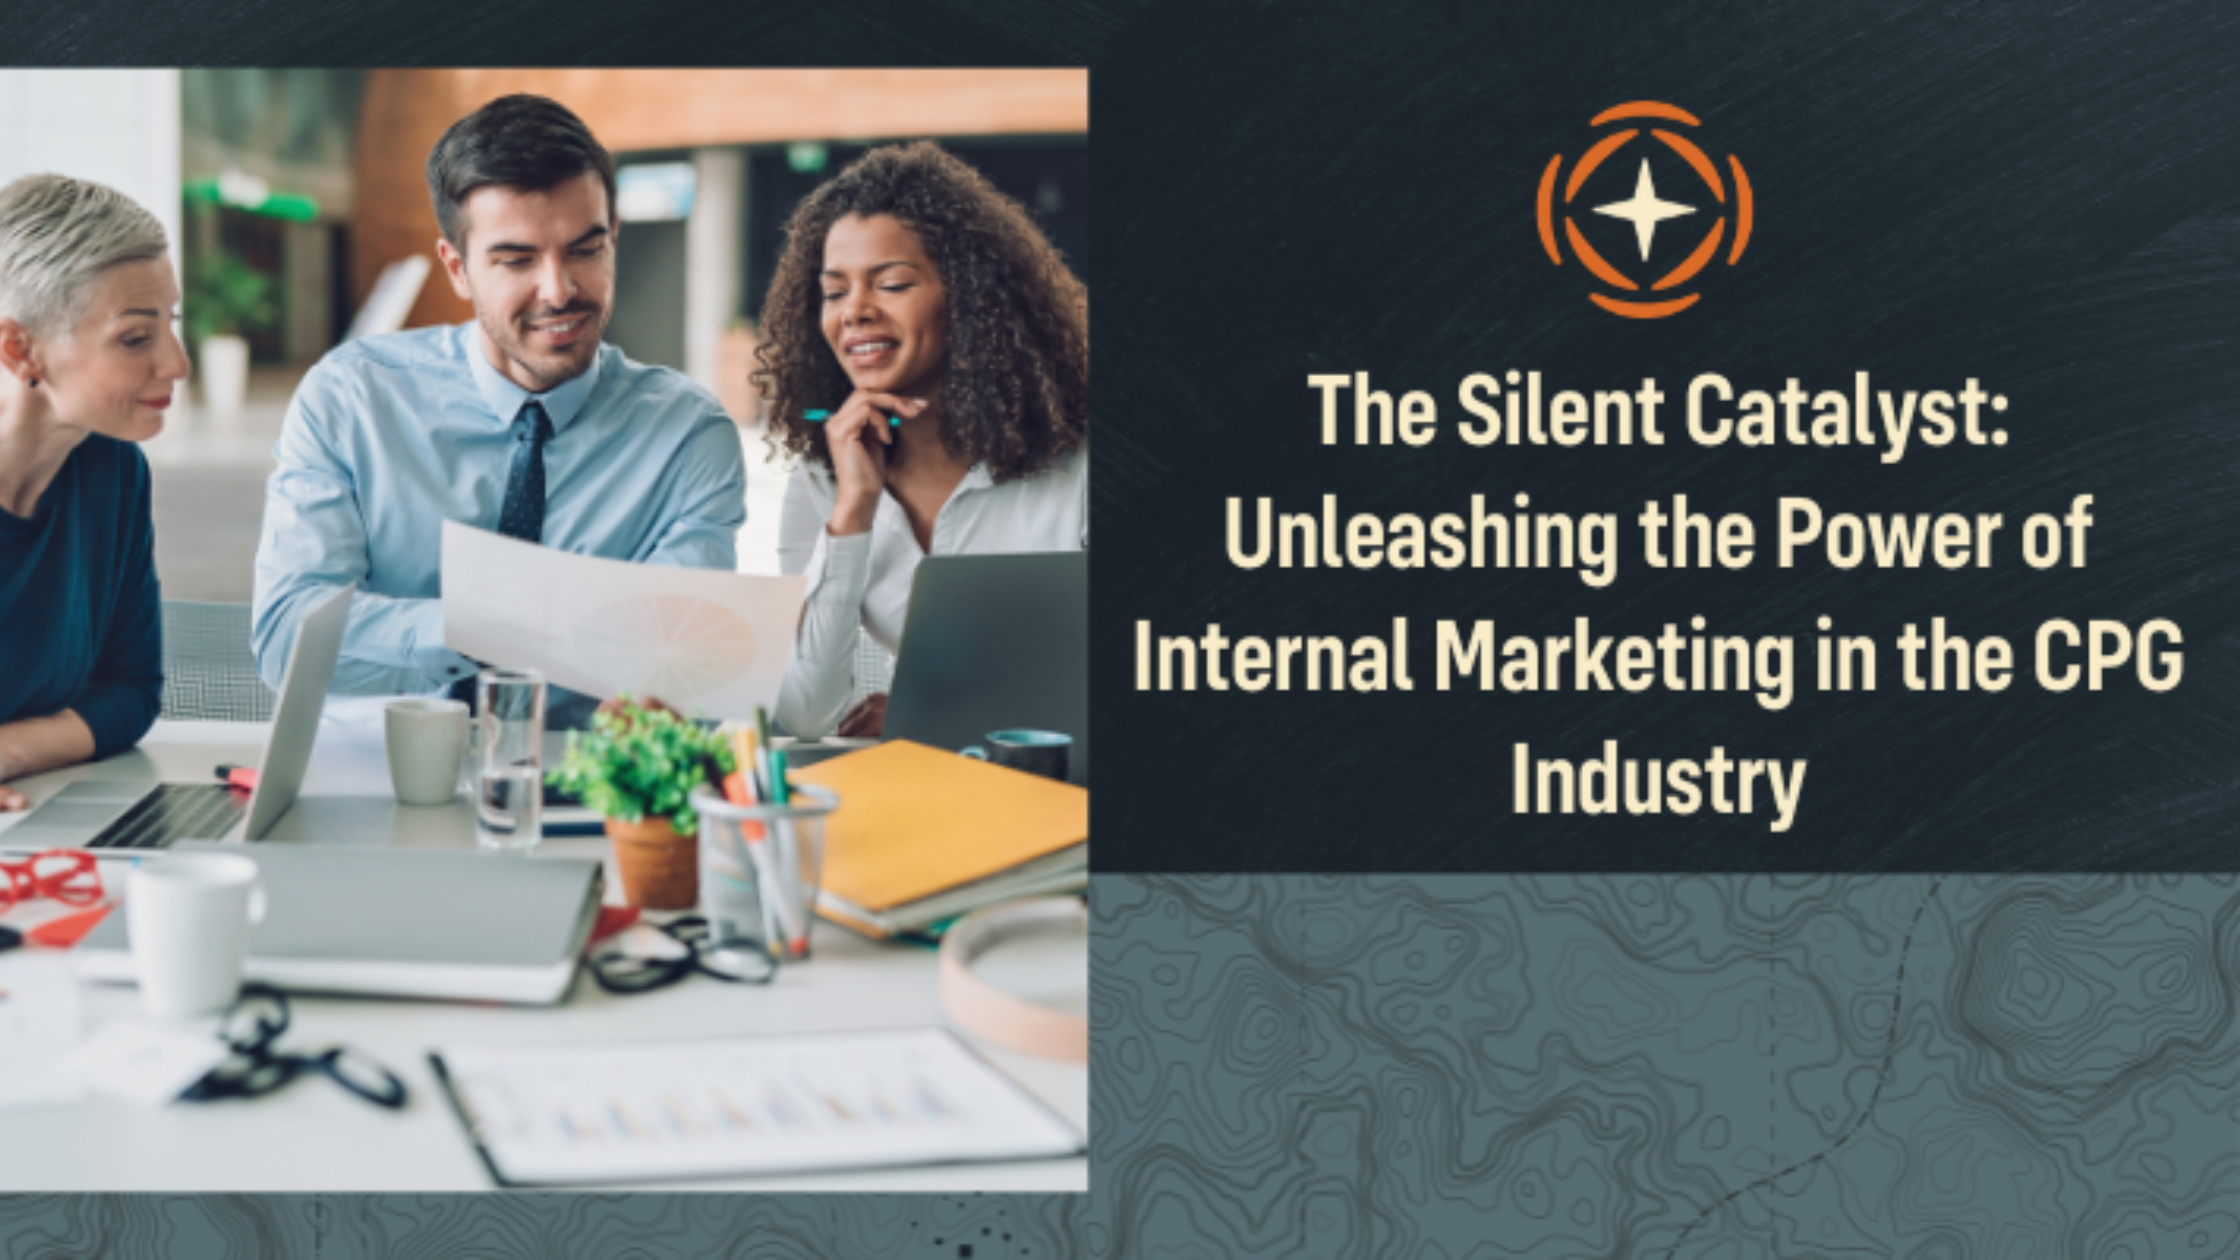 The Silent Catalyst: Unleashing the Power of Internal Marketing in the CPG Industry